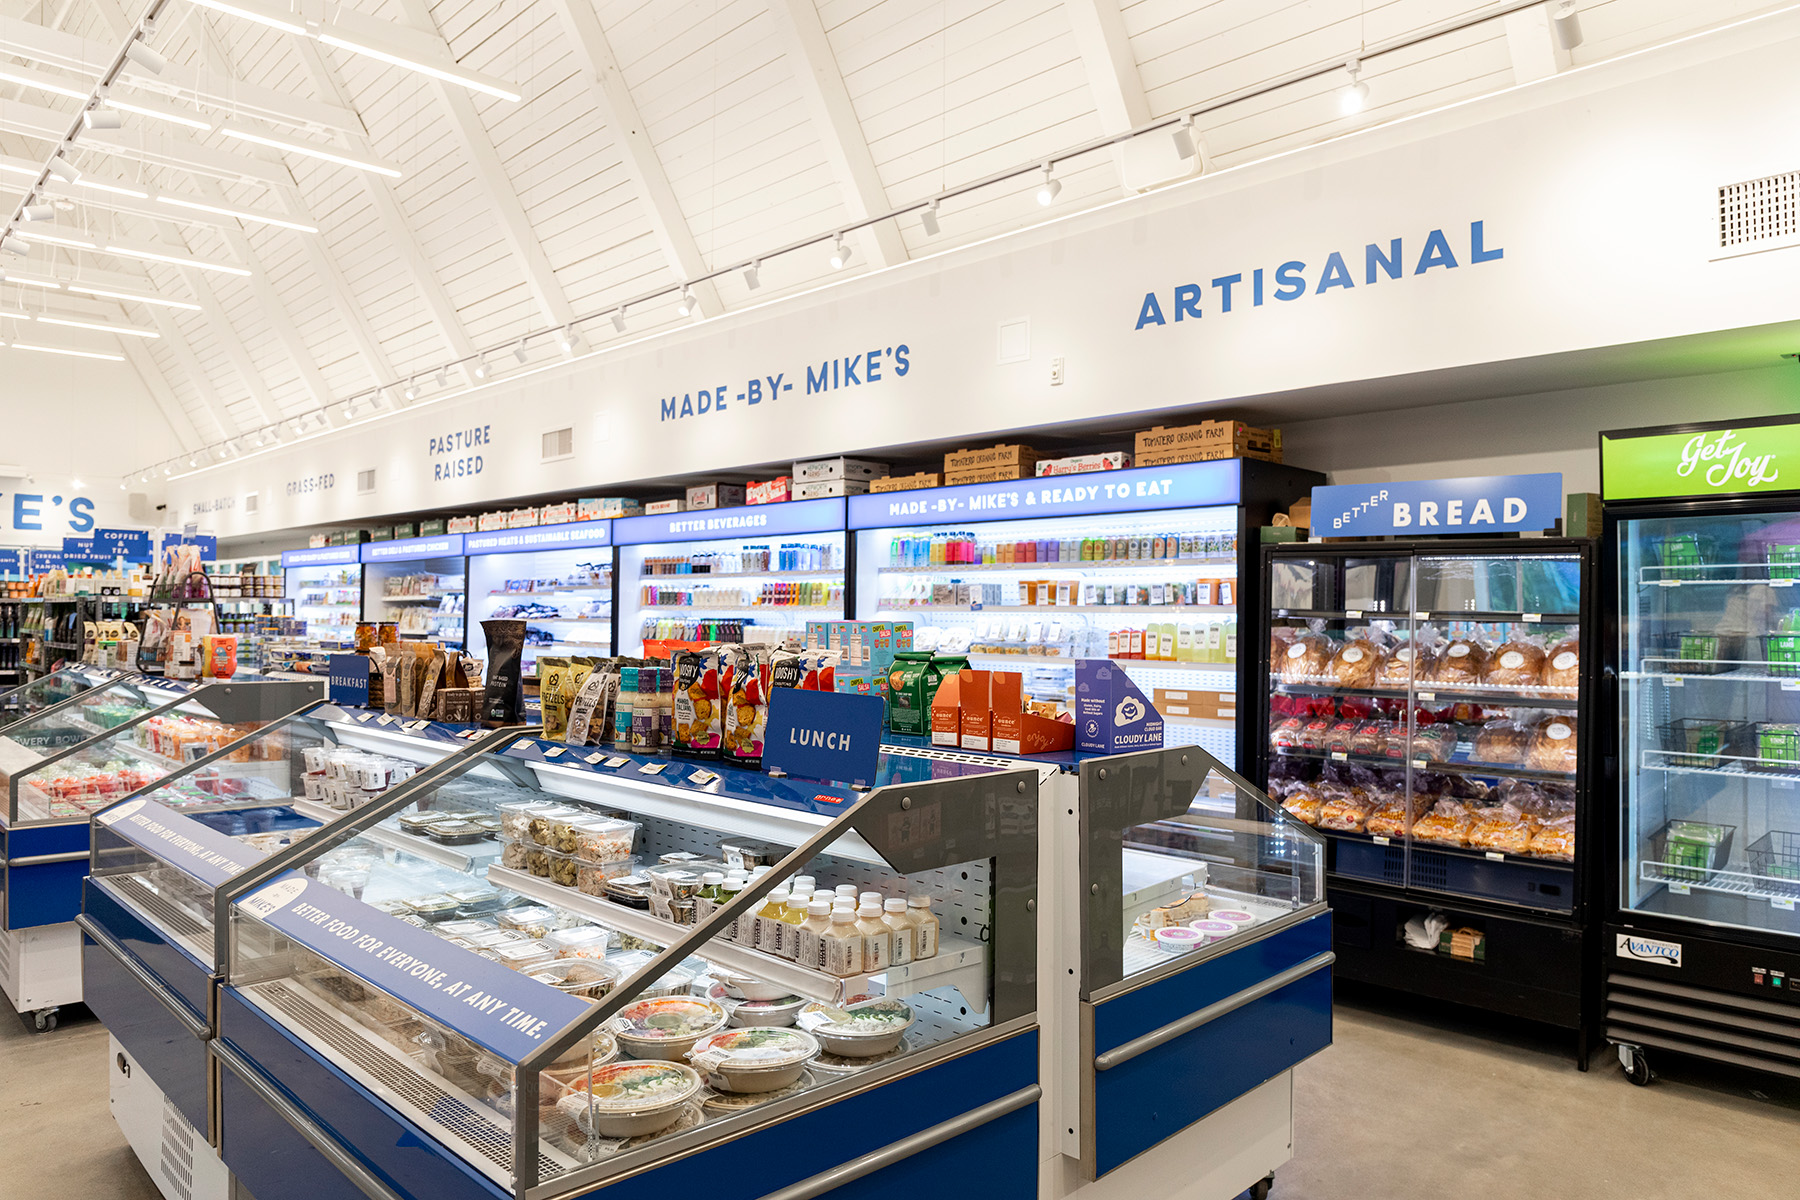  Openshop used Alcon Lighting LED Track Lights to highlight signage and products in the store, which can also be adjusted to light in-store events